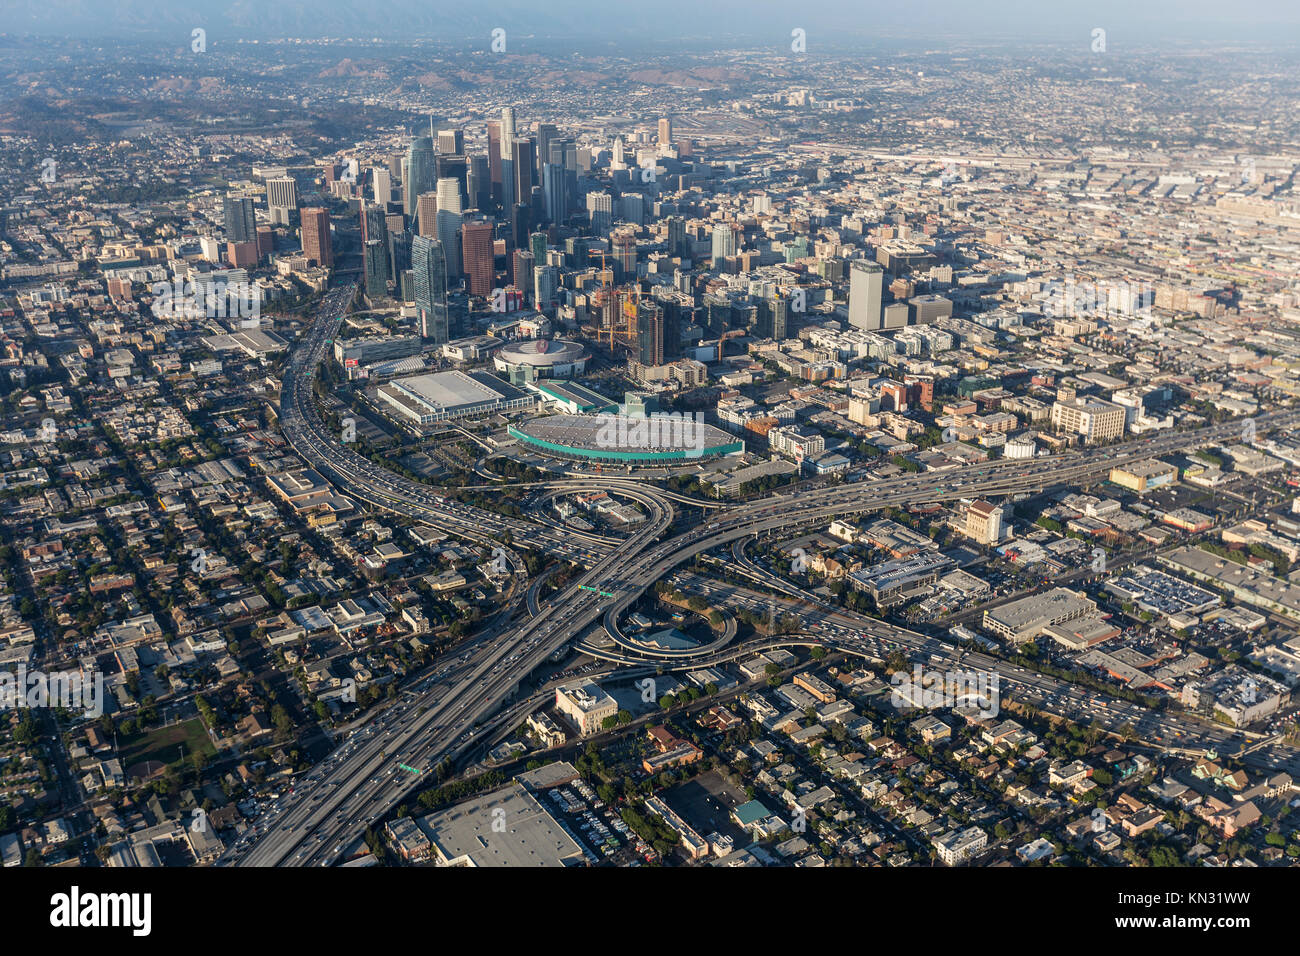 Los Angeles, California, USA - August 7, 2017:  Aerial view of the Santa Monica 10 and Harbor 110 freeway interchange near the Convention Center in do Stock Photo